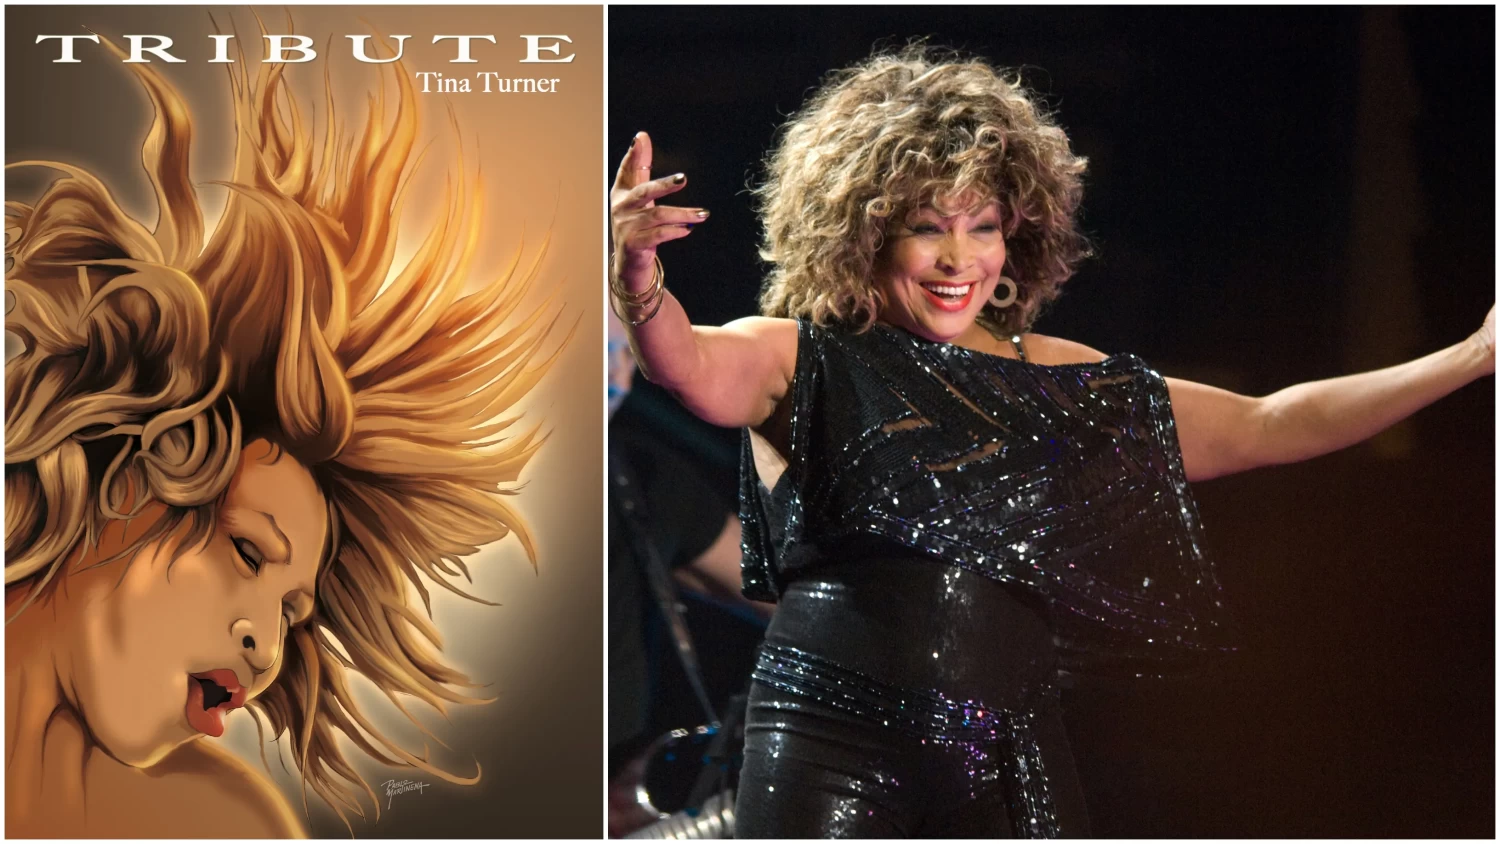 Images (left to right): TidalWave Comics; Tina Turner performs on stage at the Gelredome on March 21st, 2009 in Arnhem, Netherlands. (Photo by Rob Verhorst/Redferns)